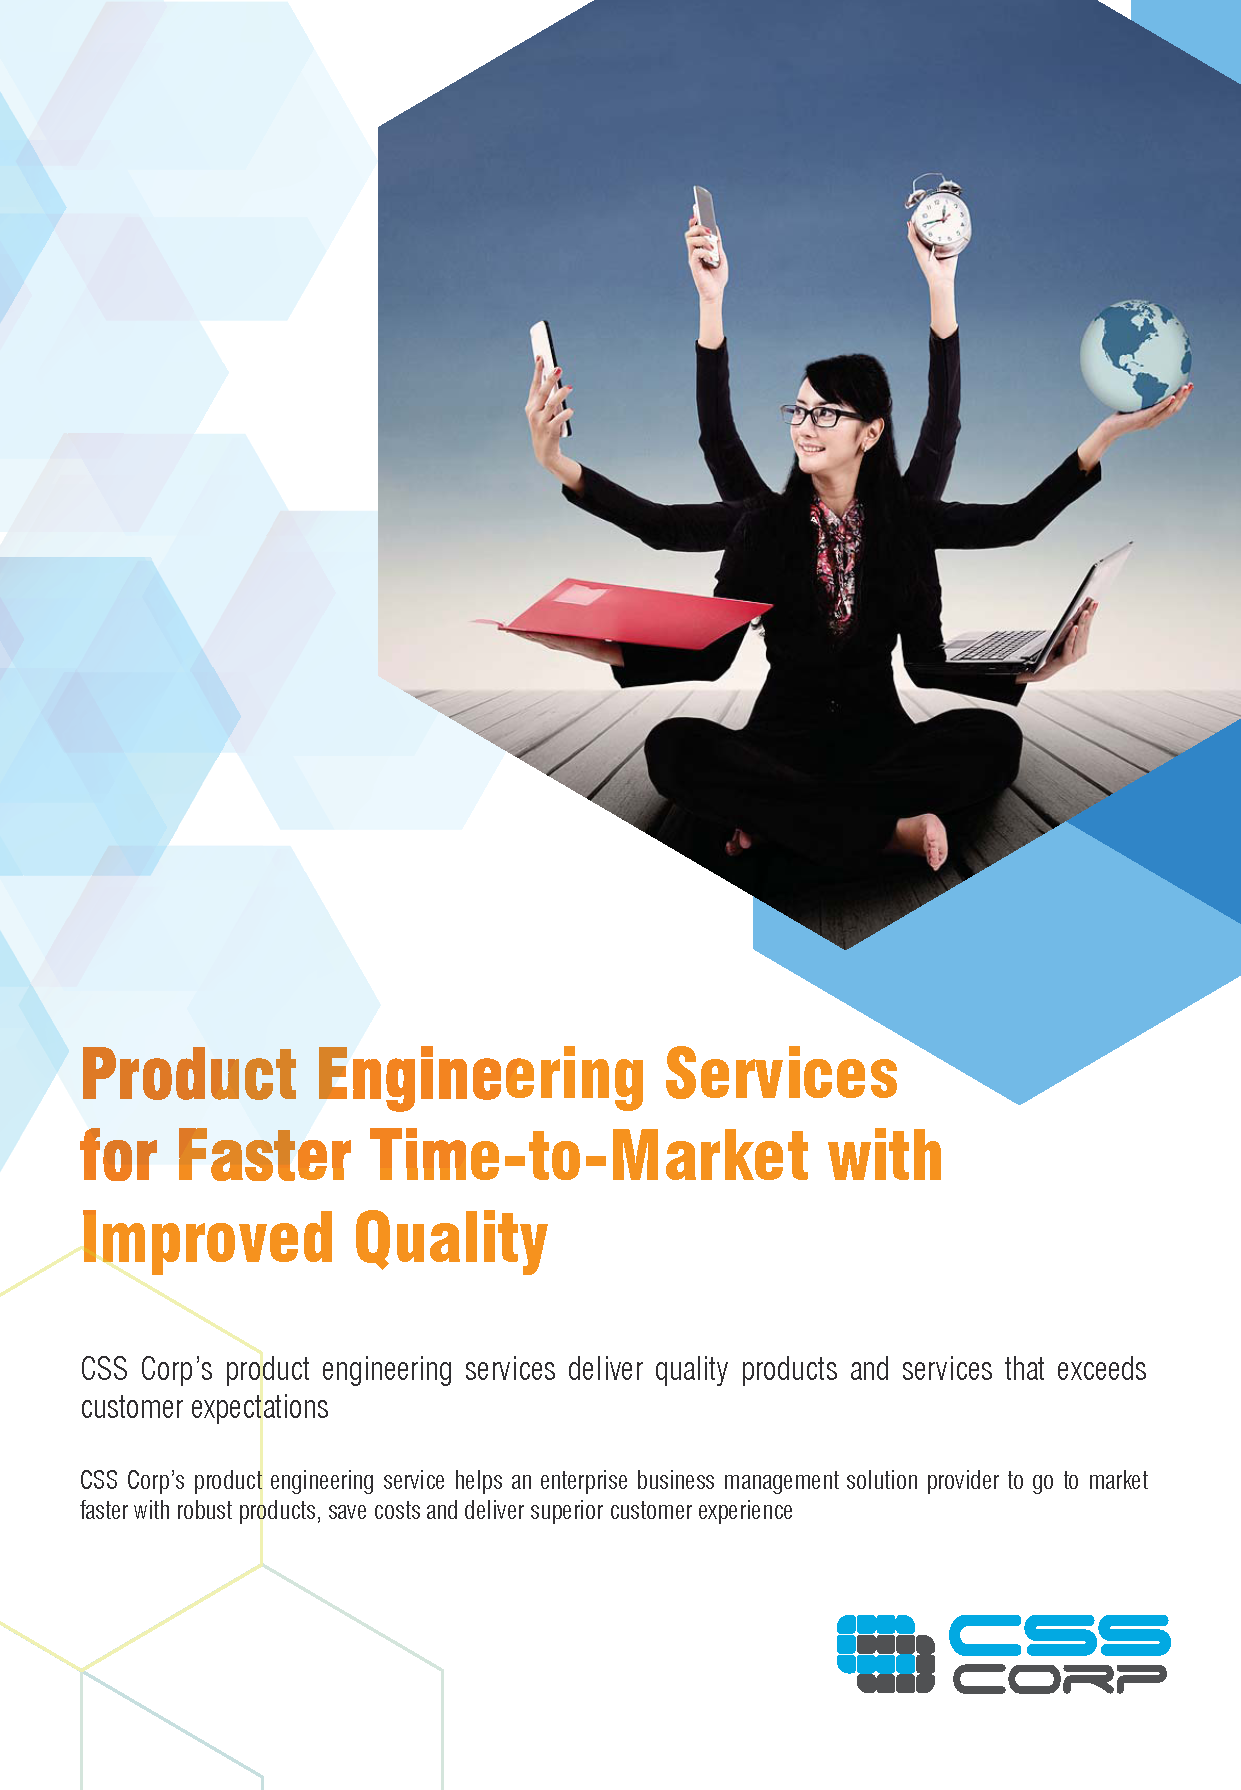 Product Engineering Services for Faster Time-to-Market